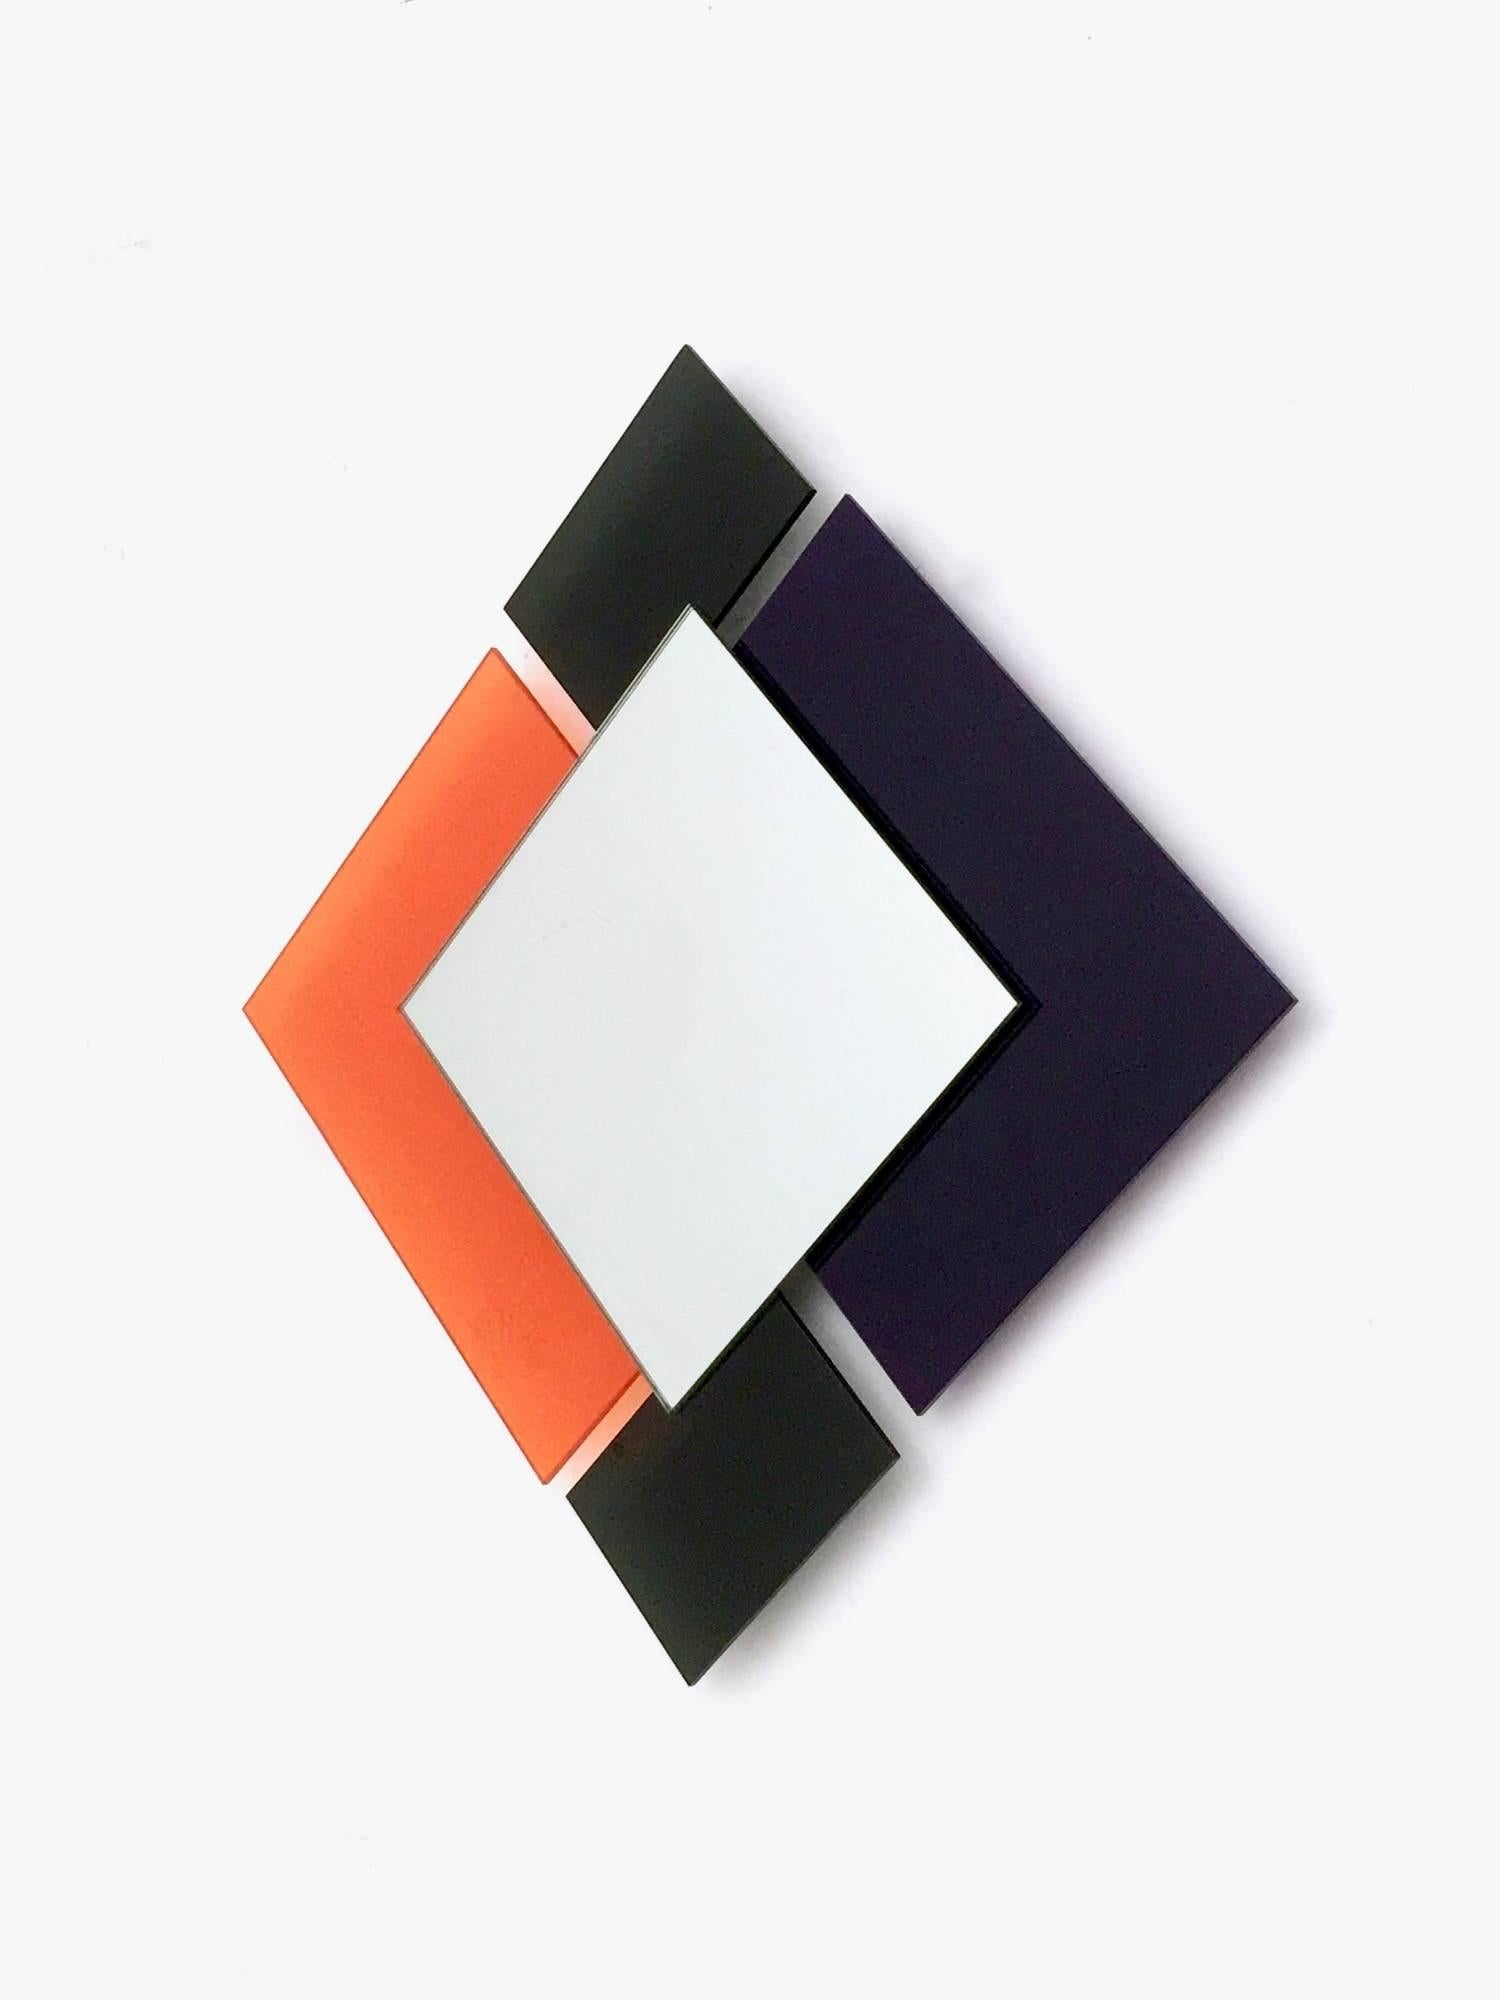 Pair of Postmodern Black and Orange Wall Mirrors in the Style of Sottsass, 1980s For Sale 2